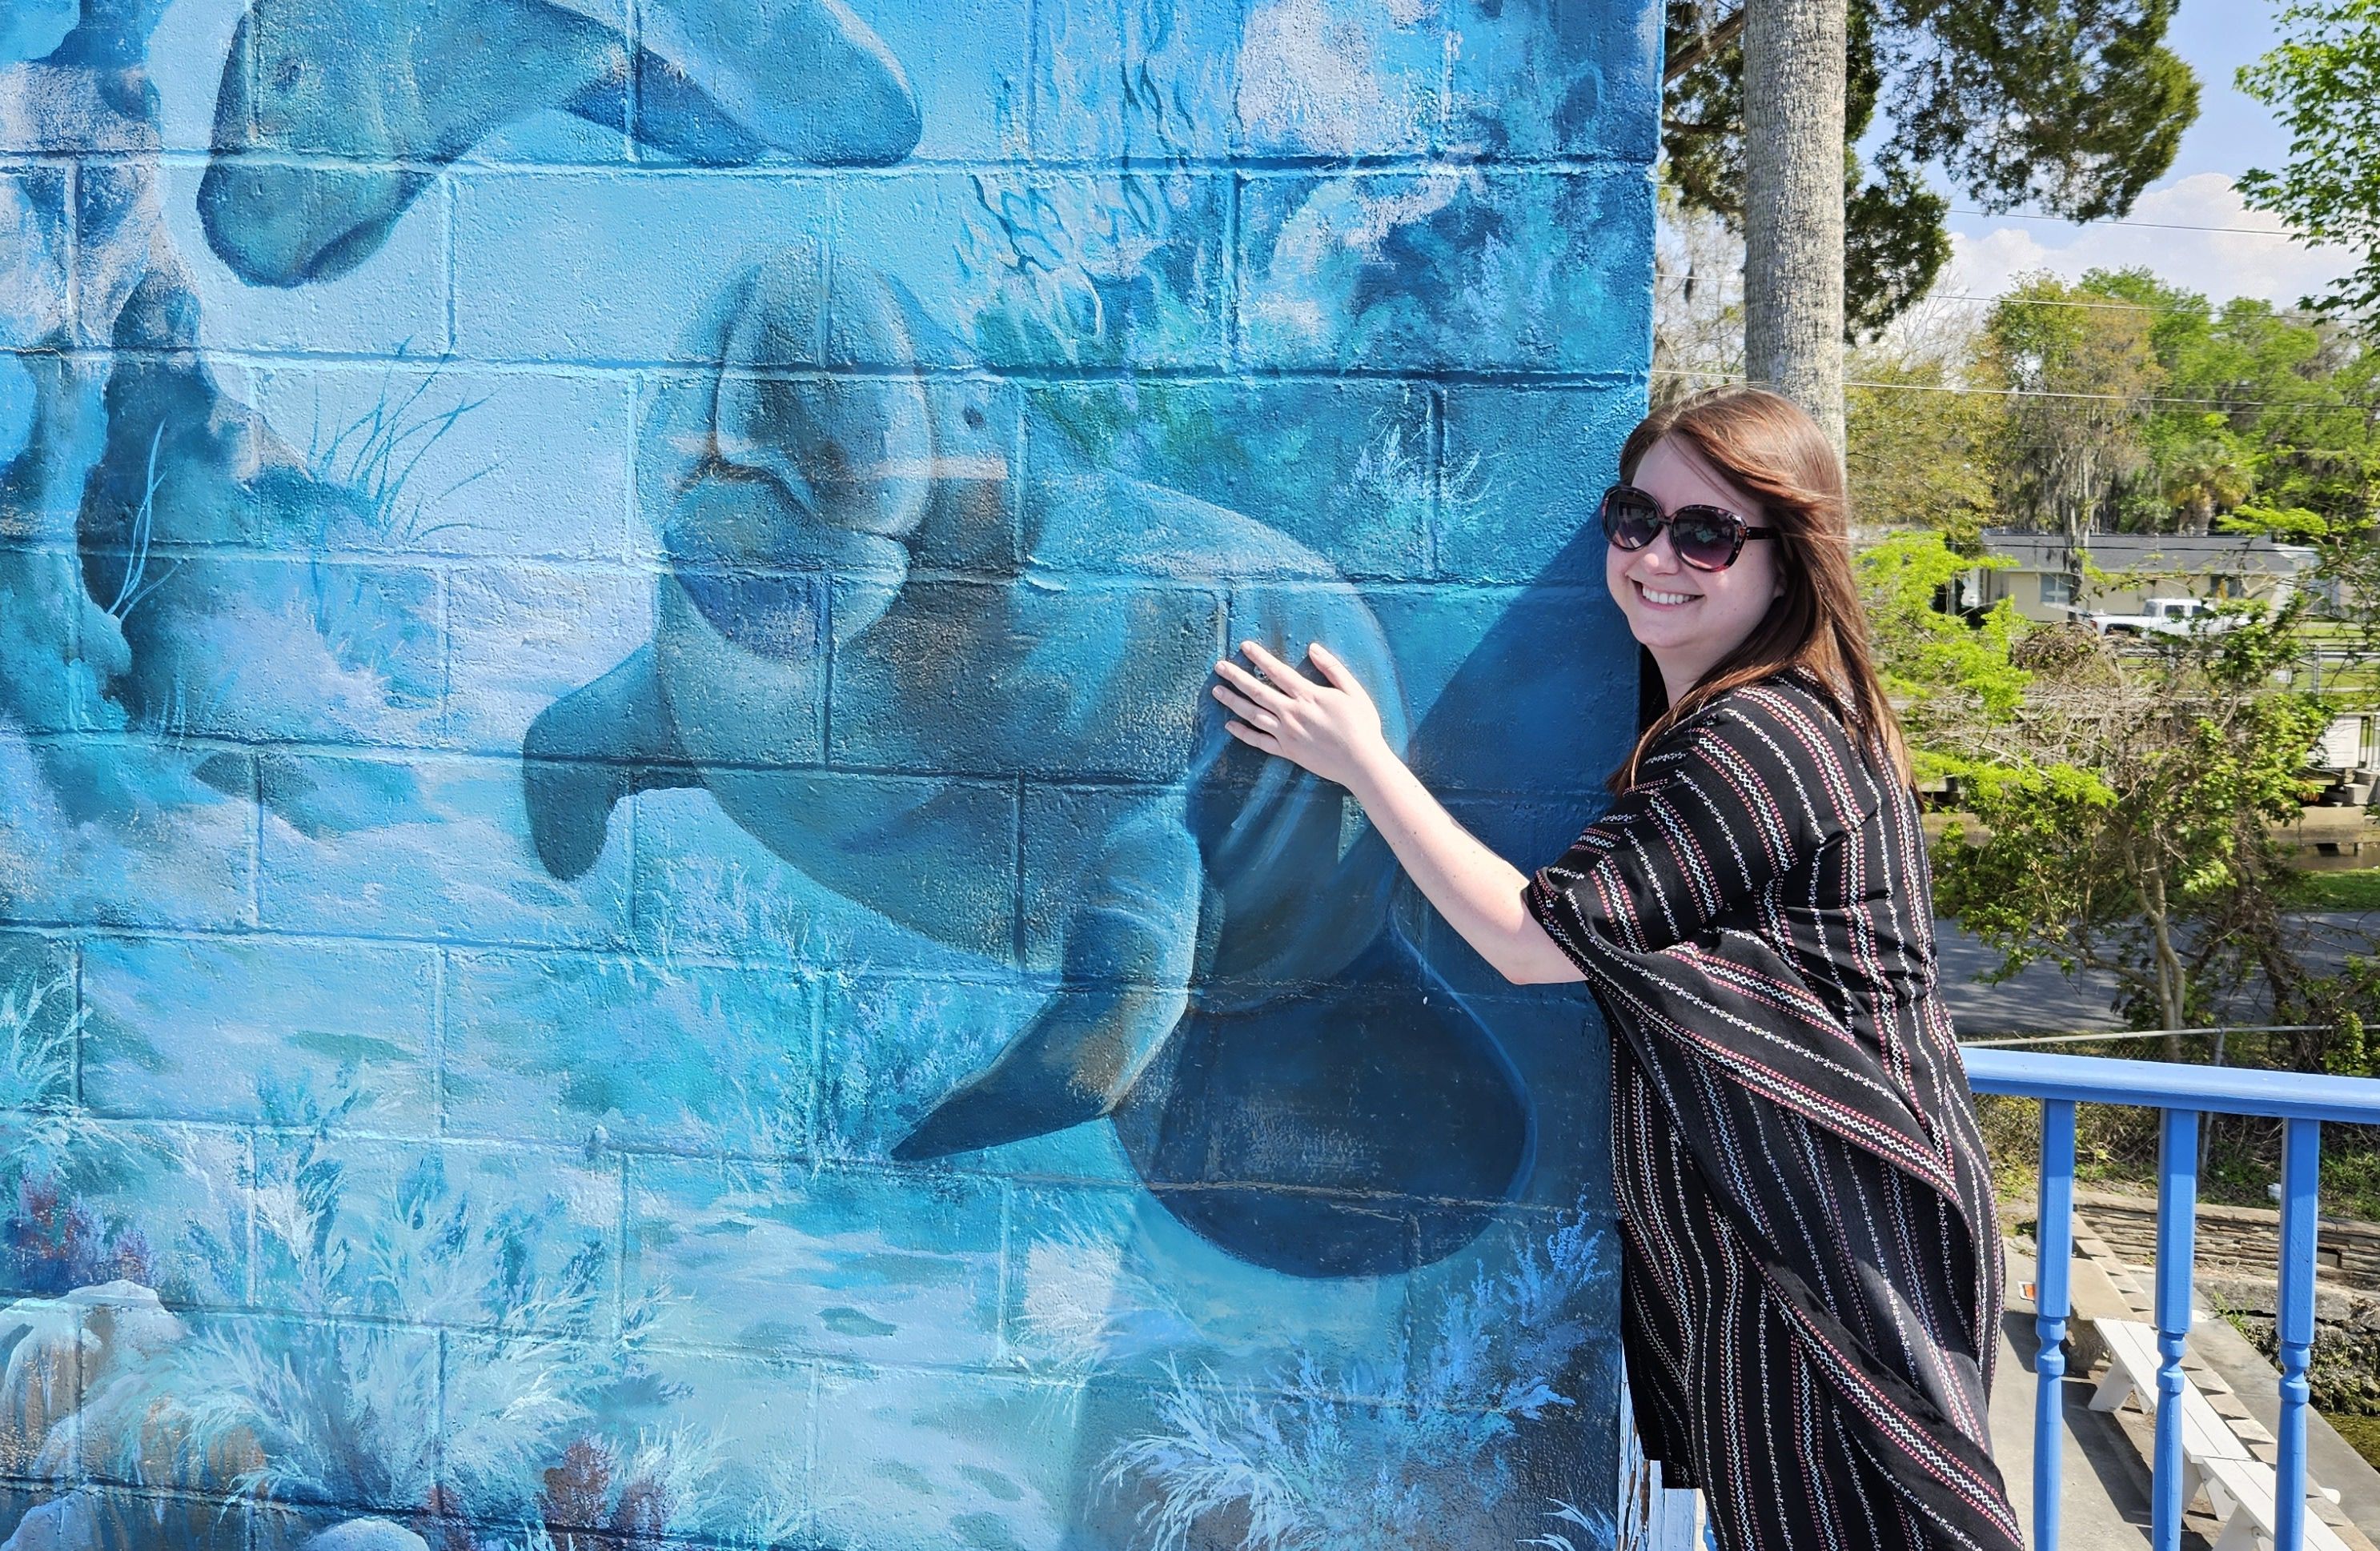 Alissa poses next to a manatee mural on a brick wall